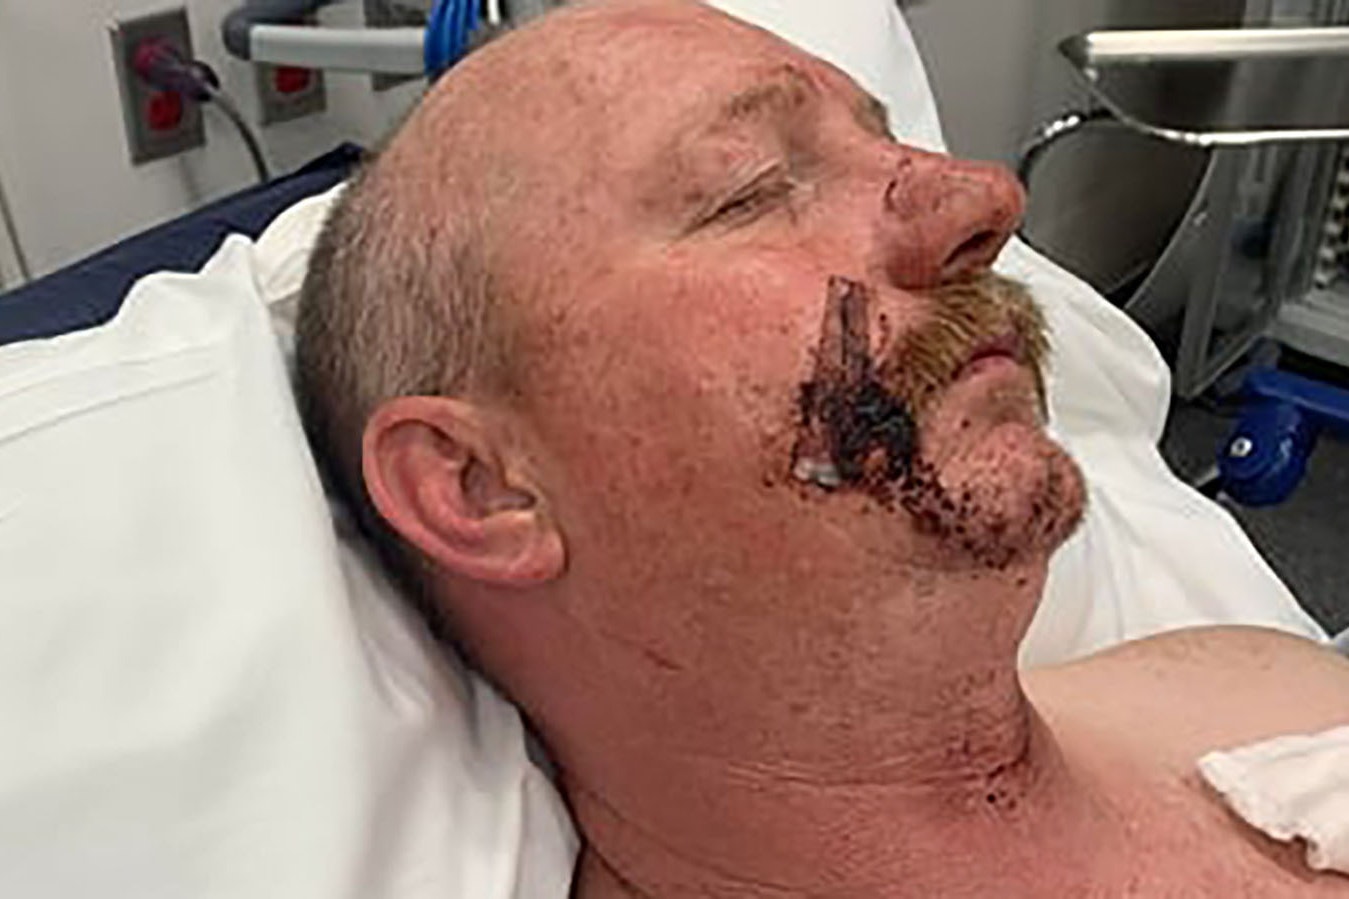 Moorcroft, Wyoming, resident Michael Hammond Jr. was picked up in Nebraska over the weekend after allegedly beating his wife. During the ordeal, she reportedly got her hands on a knife and stabbed him to end an hours-long beating.